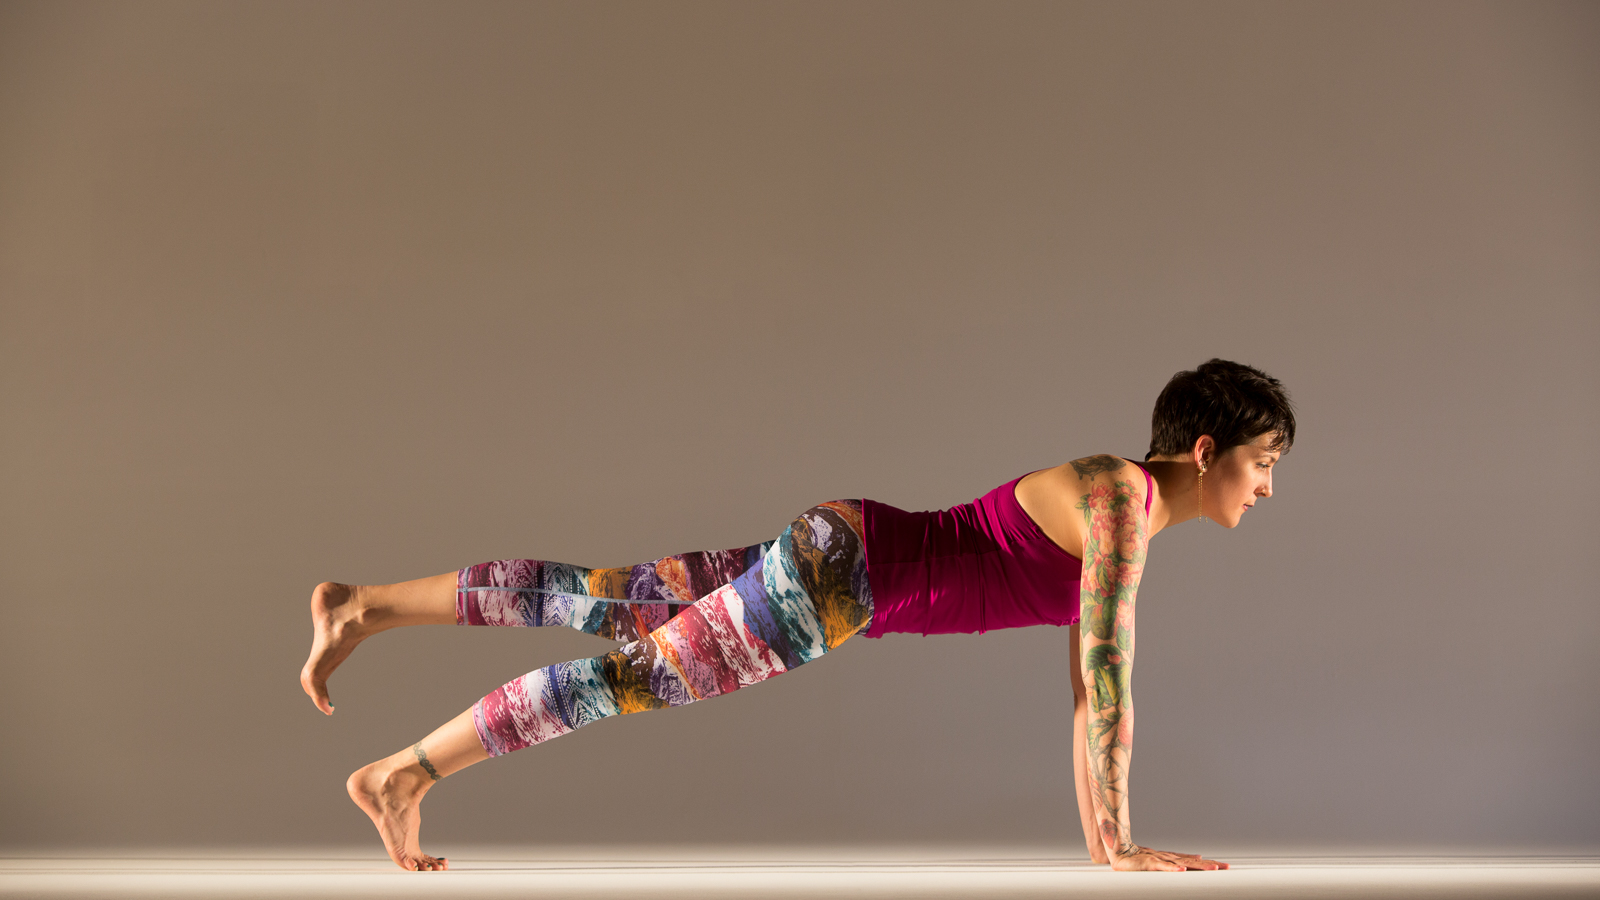 Yoga 101: How to Chaturanga Like A Champ - Fit Bottomed Girls